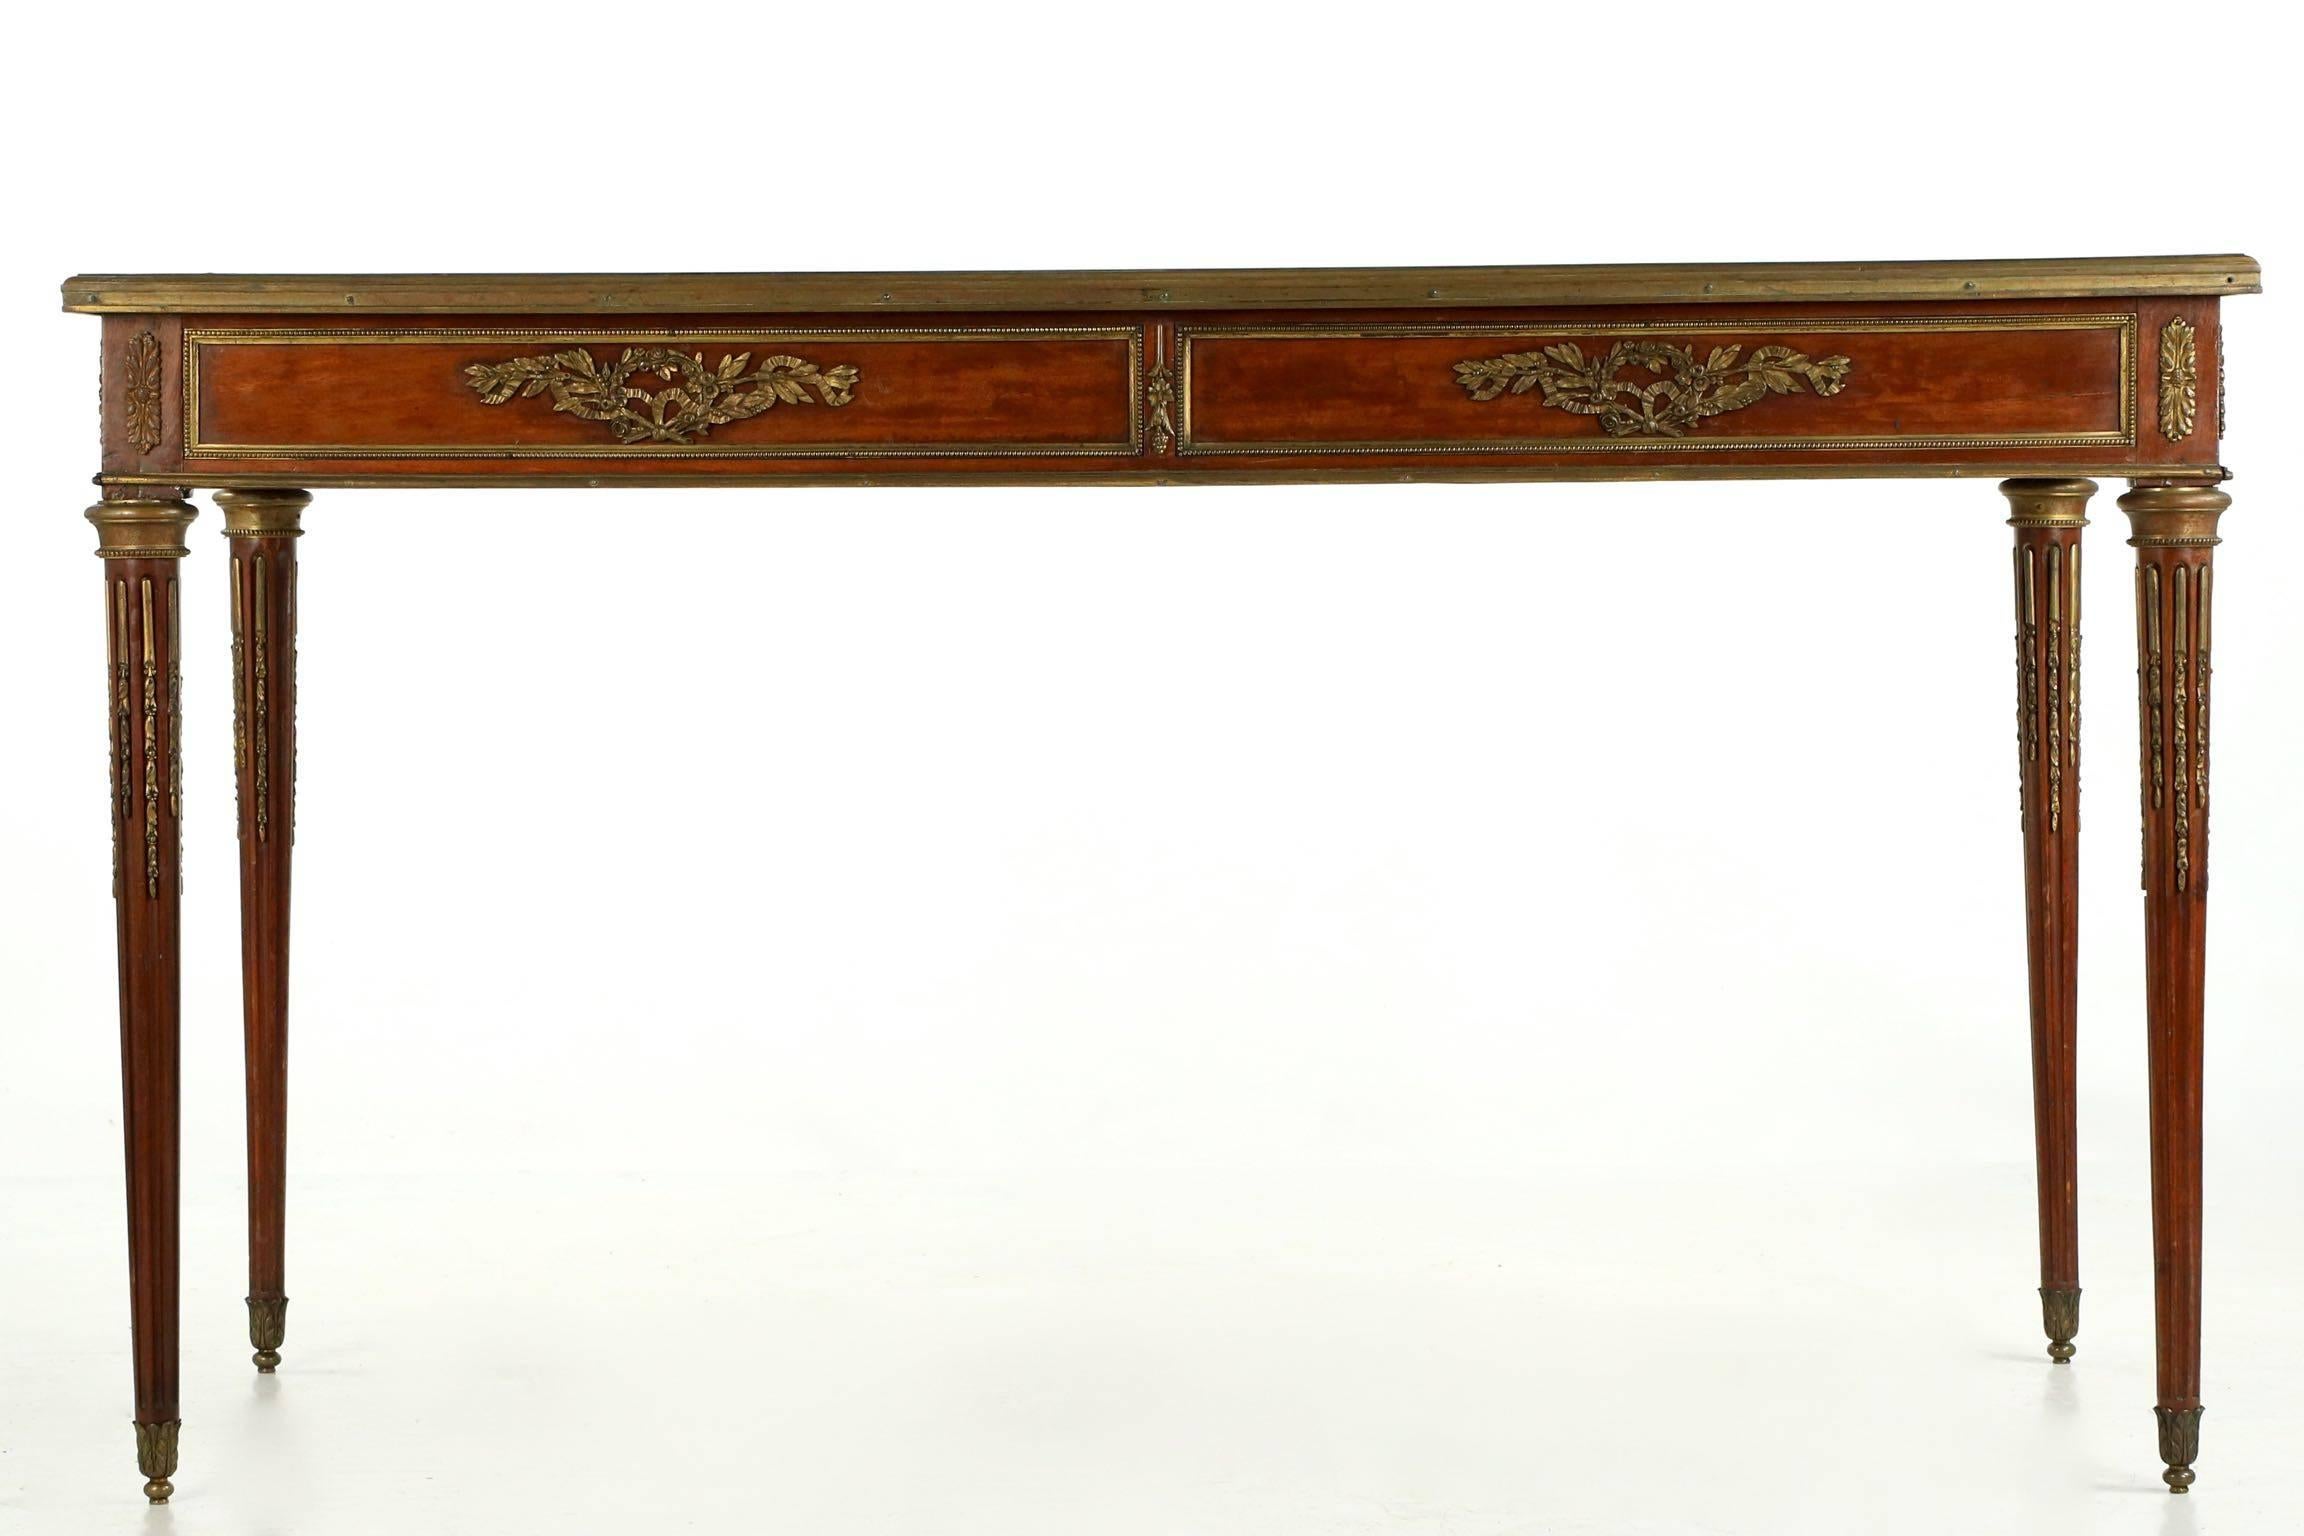 19th Century French Louis XVI Style Mahogany Leather Top Antique Writing Desk (Louis XVI.)